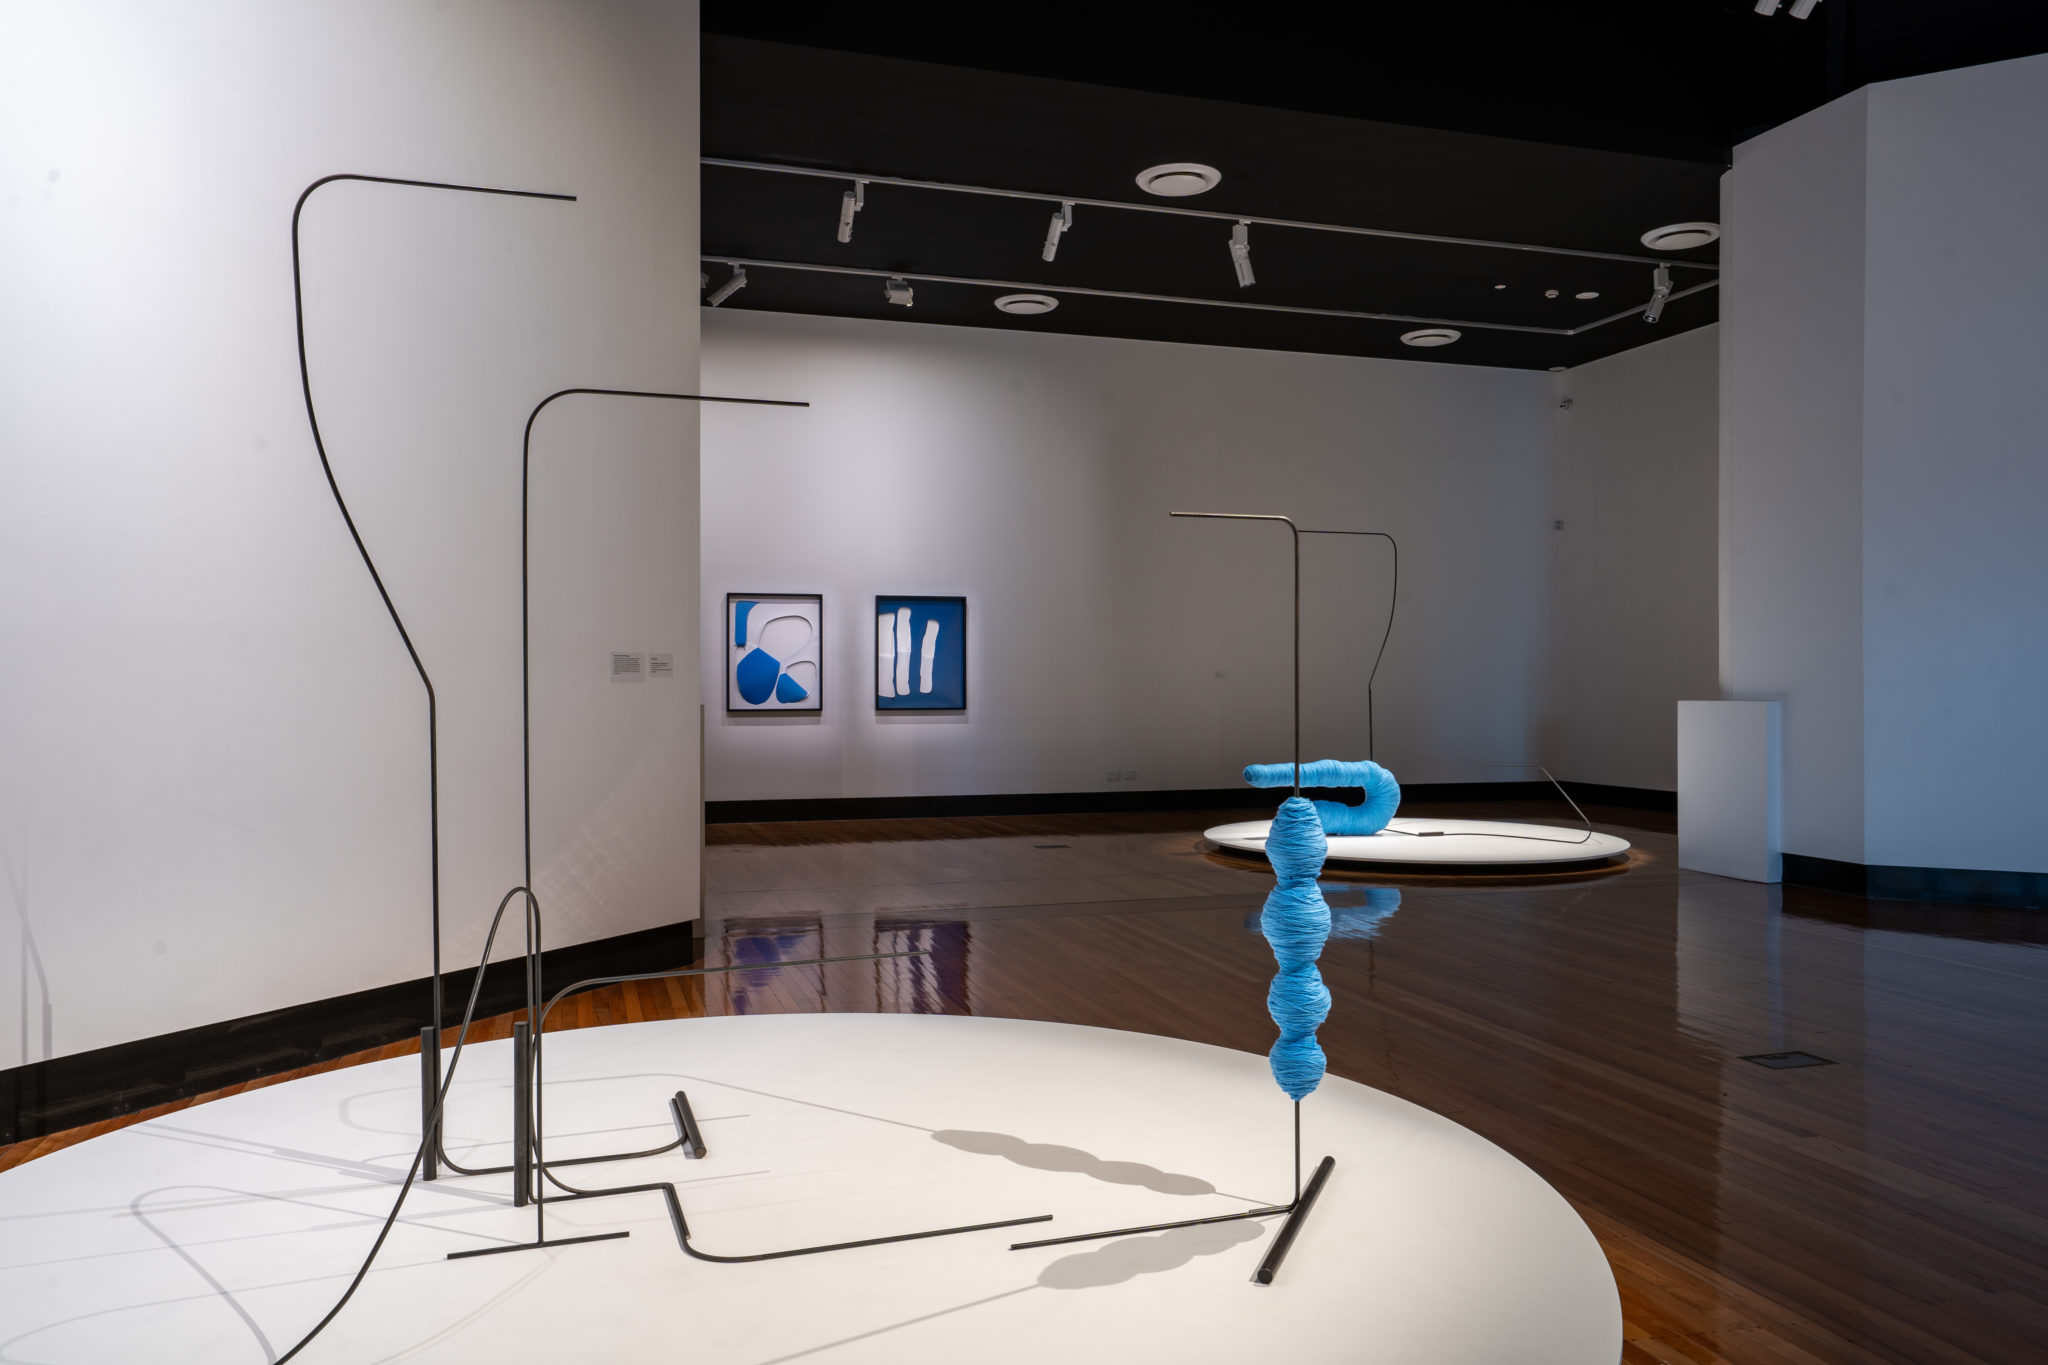 FIELD OF VISIONS: An exhibition by Mira Gojak & Michael Prior, Exhibition documentation, Gallery 1 & 2, Latrobe Regional Gallery, 2022. Pictured in foreground: Distant Measures, 923 metres, 2016, Steel rod and acrylic yarn, 4 parts, 230 x 262 x 142 cm, Courtesy the artist and Murray White Room, Melbourne. Documentation by Darryl Whitaker.